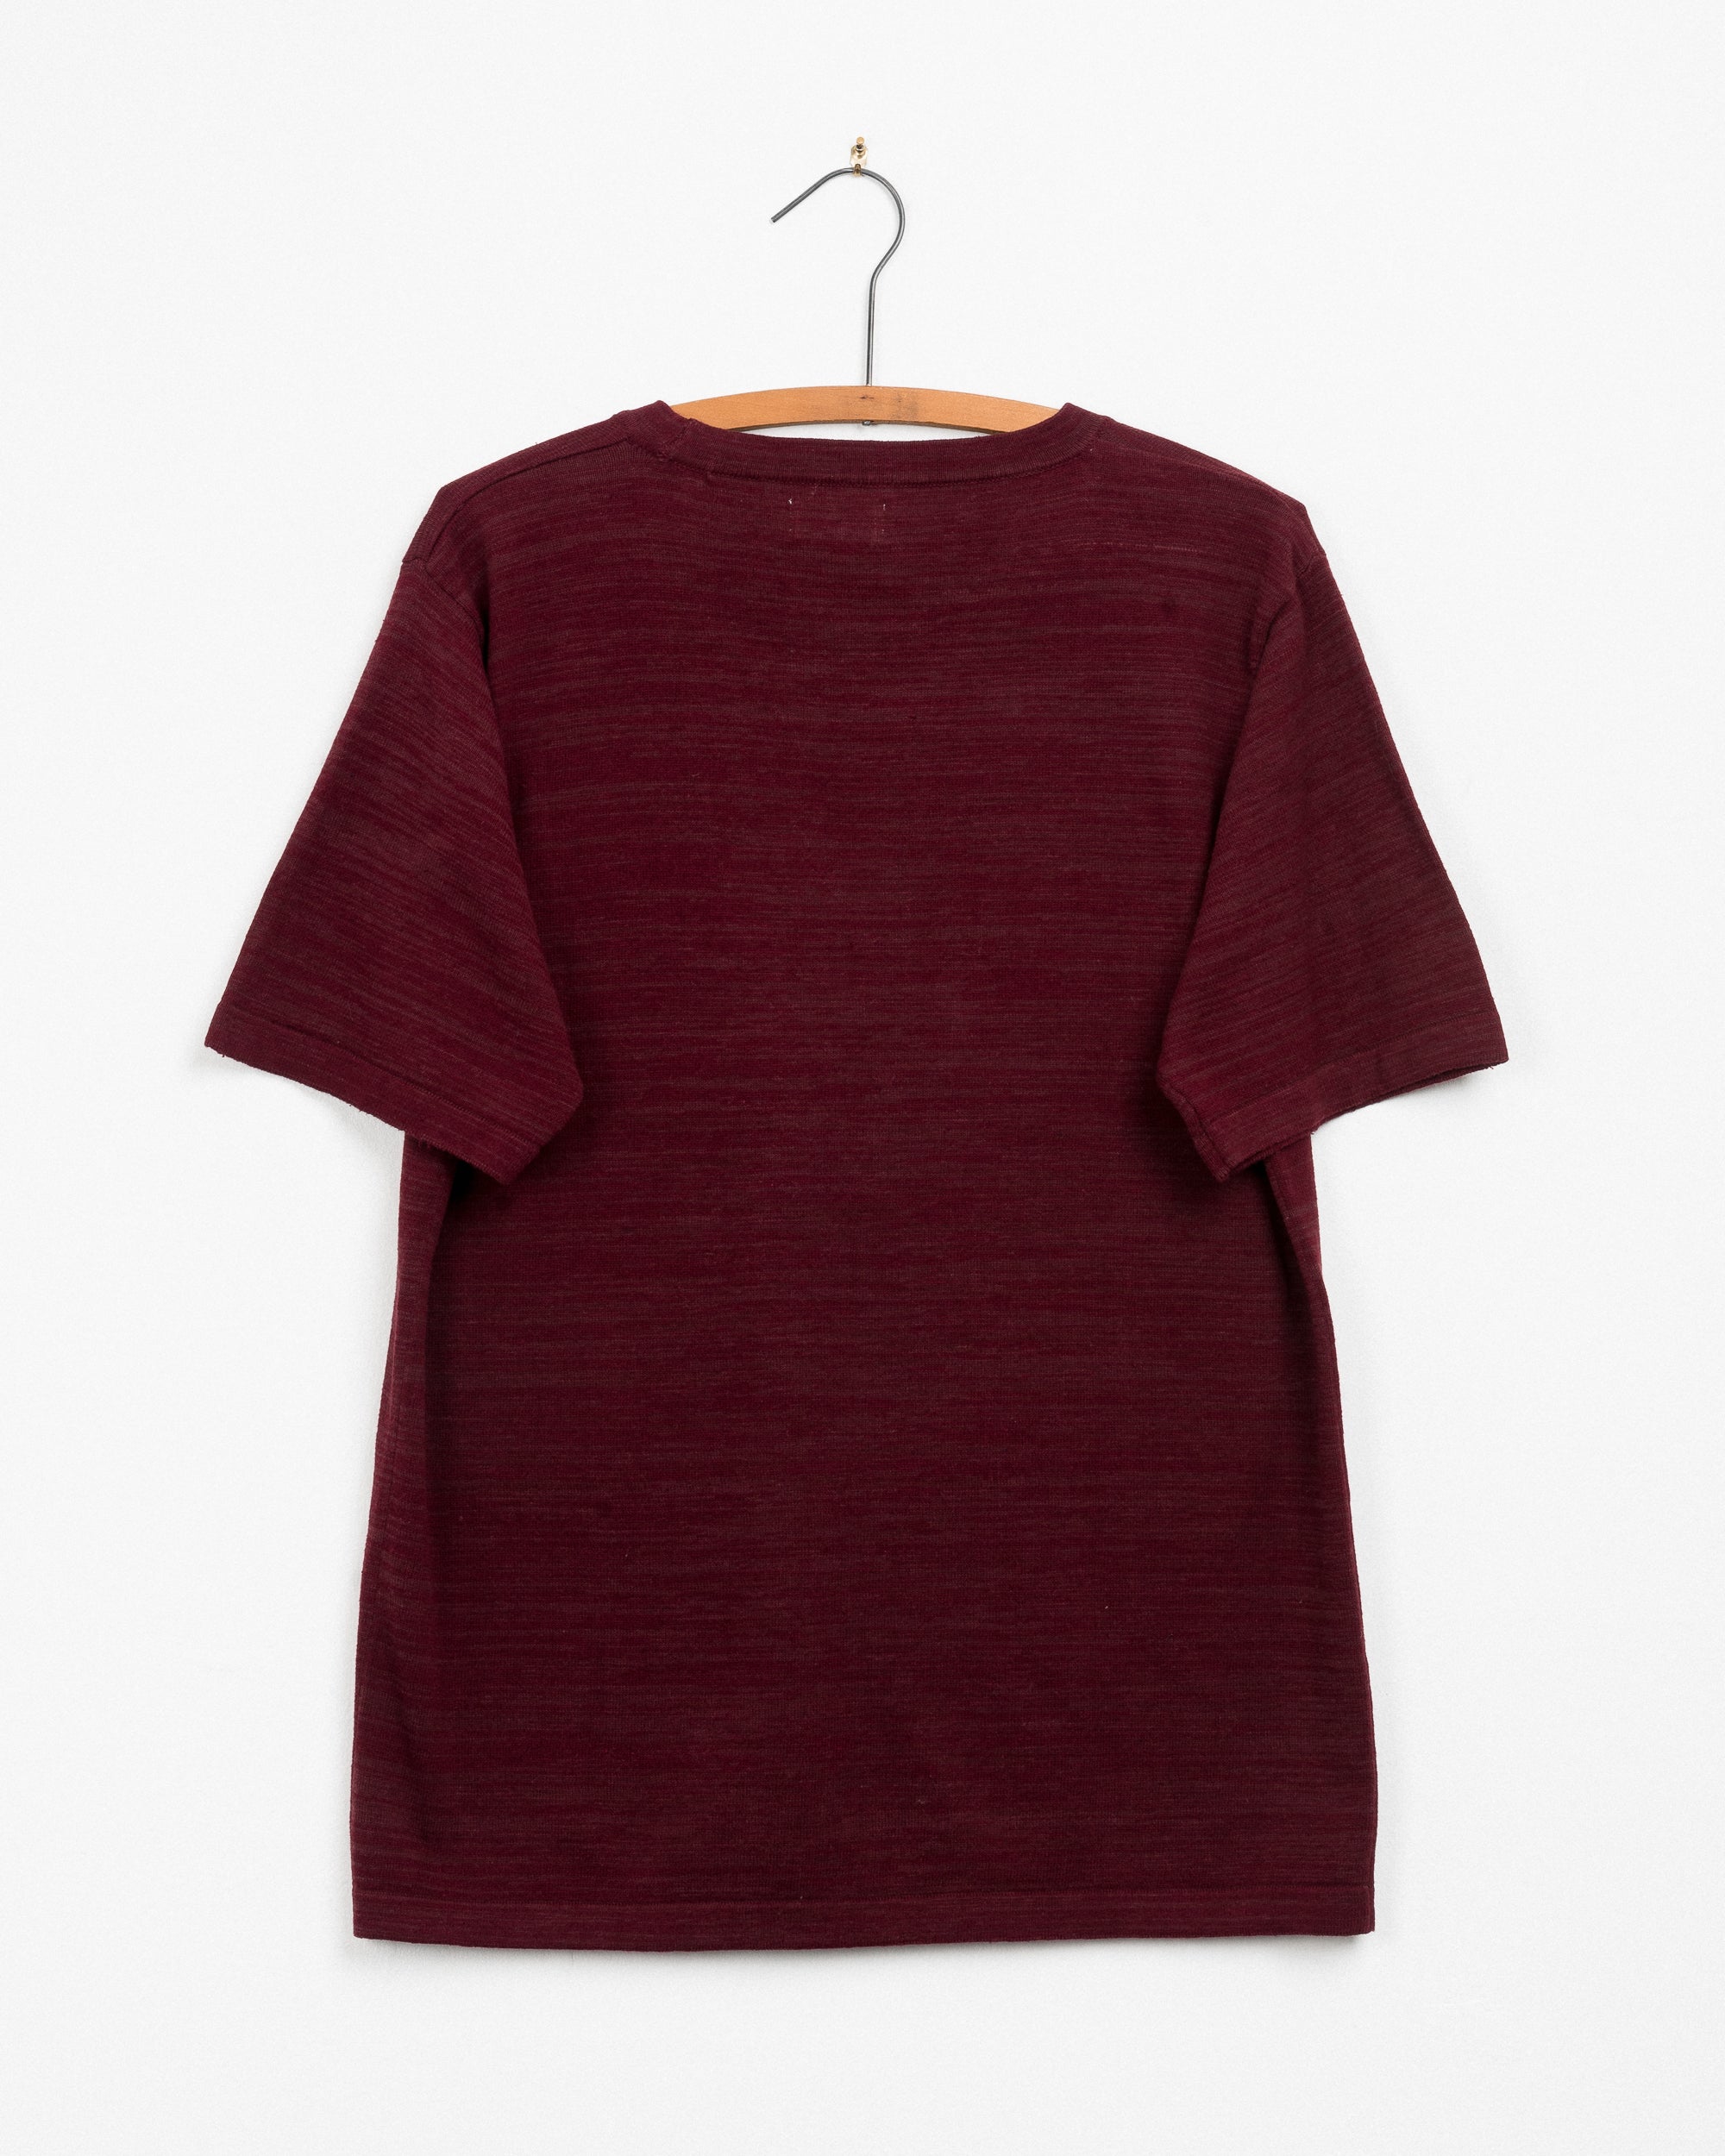 Azad S/S Pocket Flat Knitted Tee in Maroon